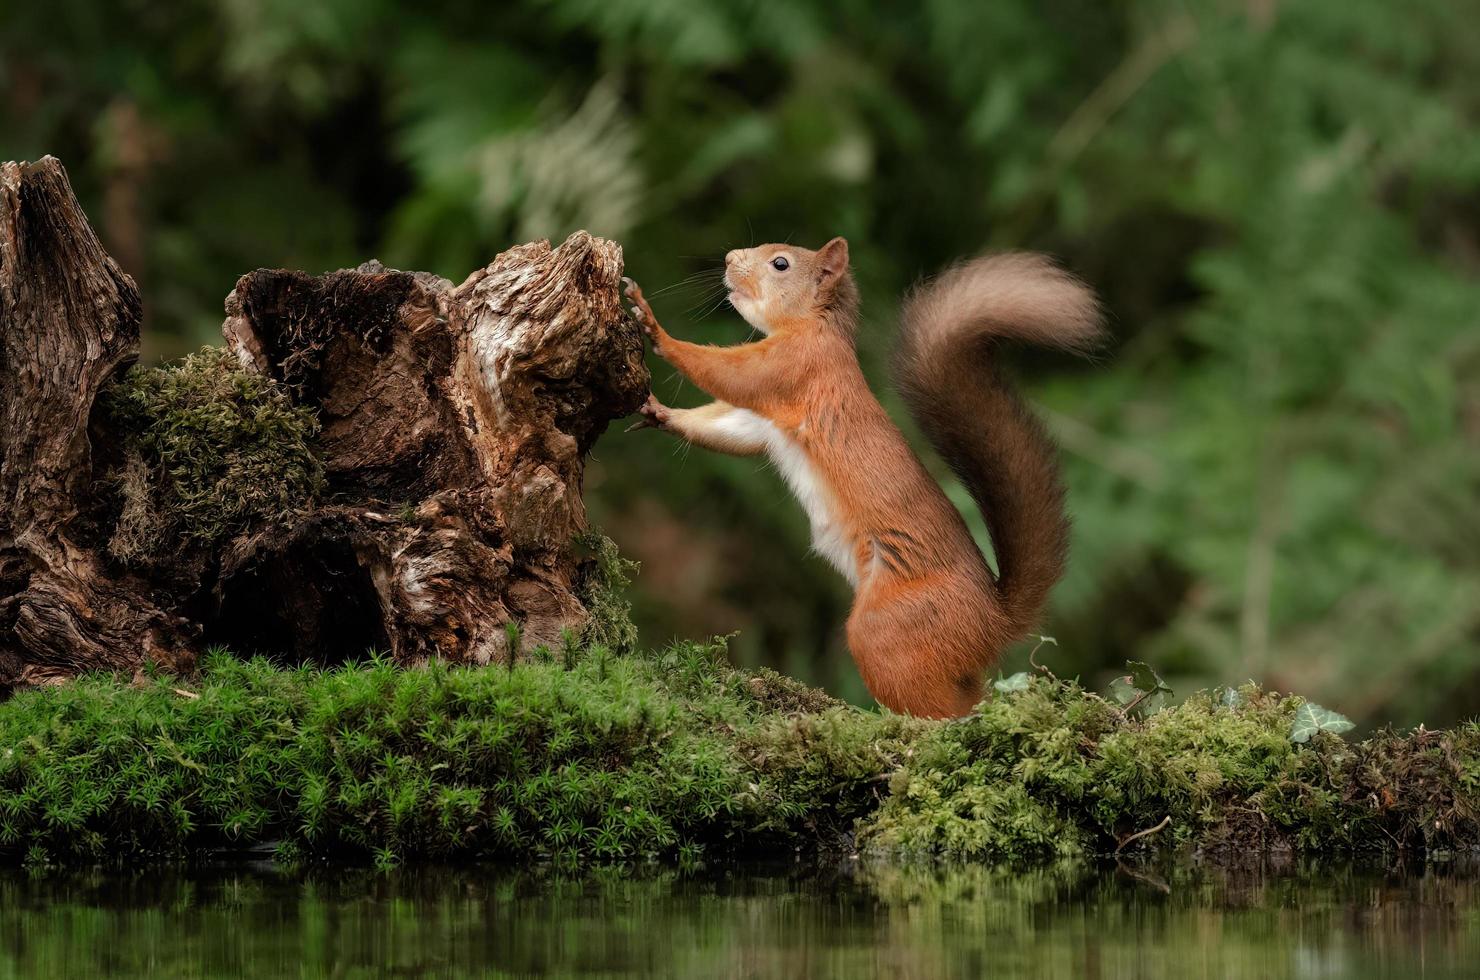 A close up of a red squirrel standing on its back legs against an old tree trunk photo